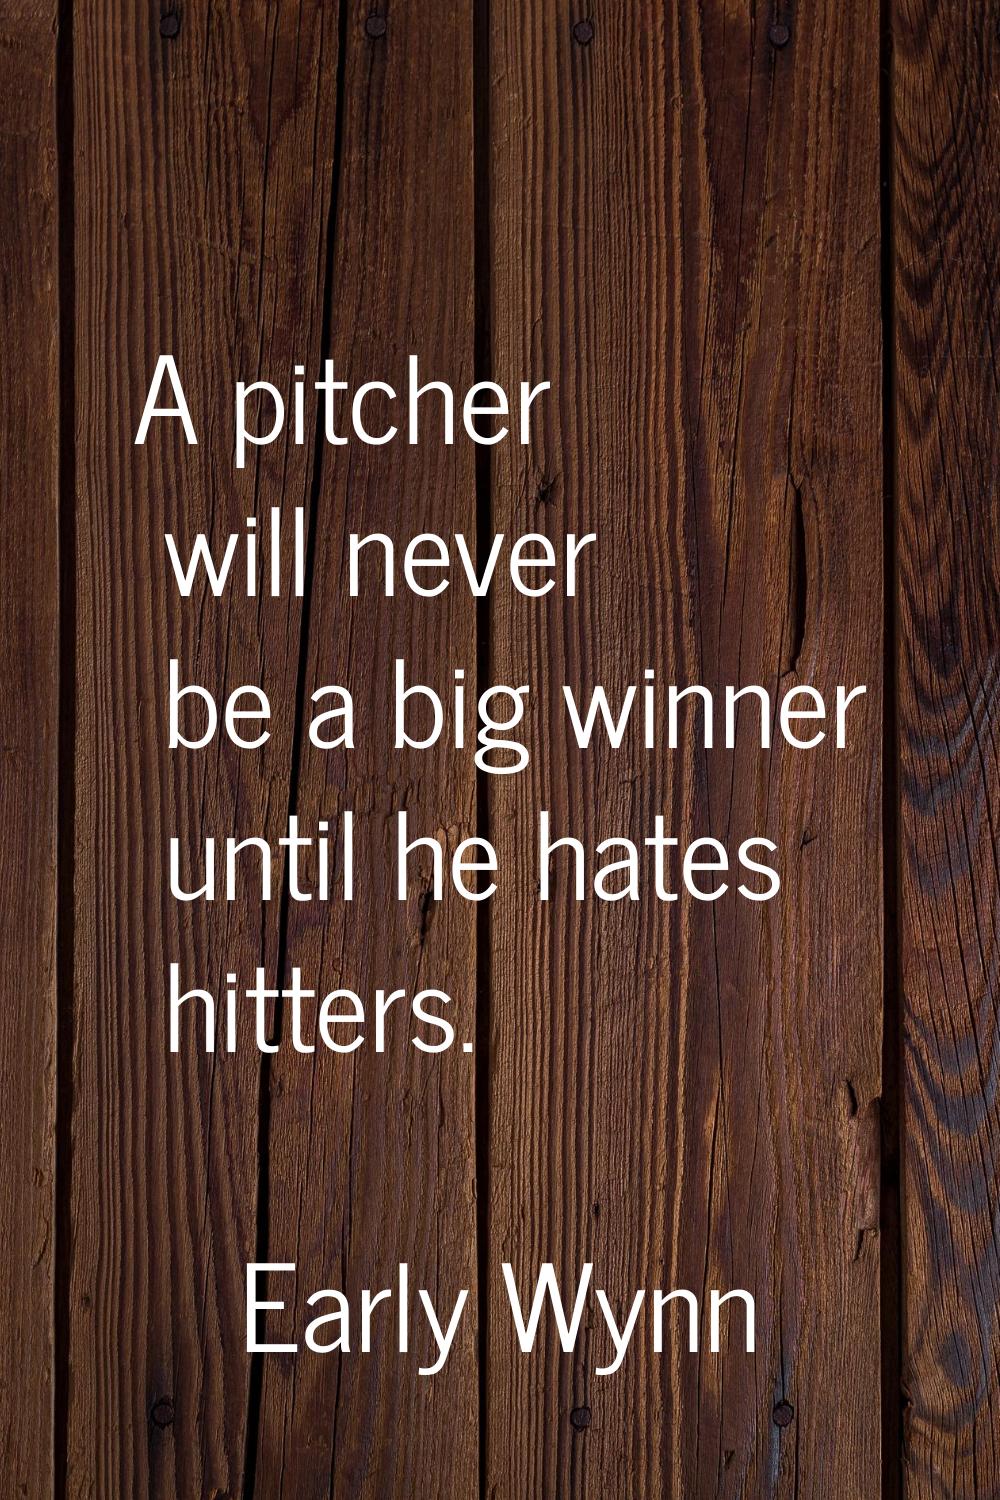 A pitcher will never be a big winner until he hates hitters.